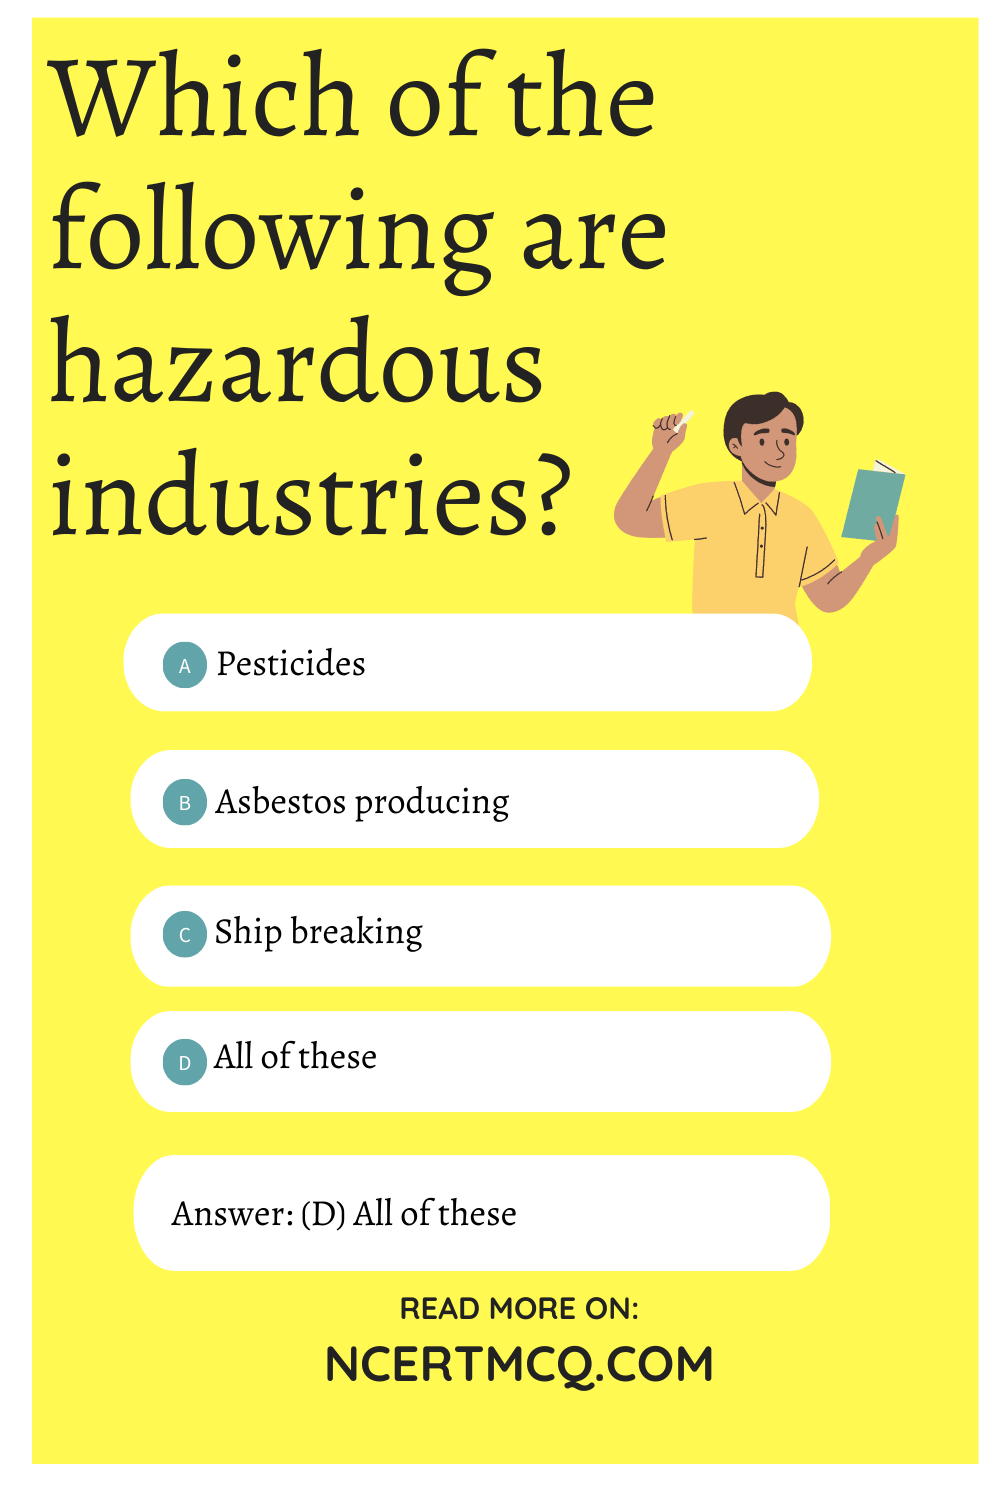 Which of the following are hazardous industries?